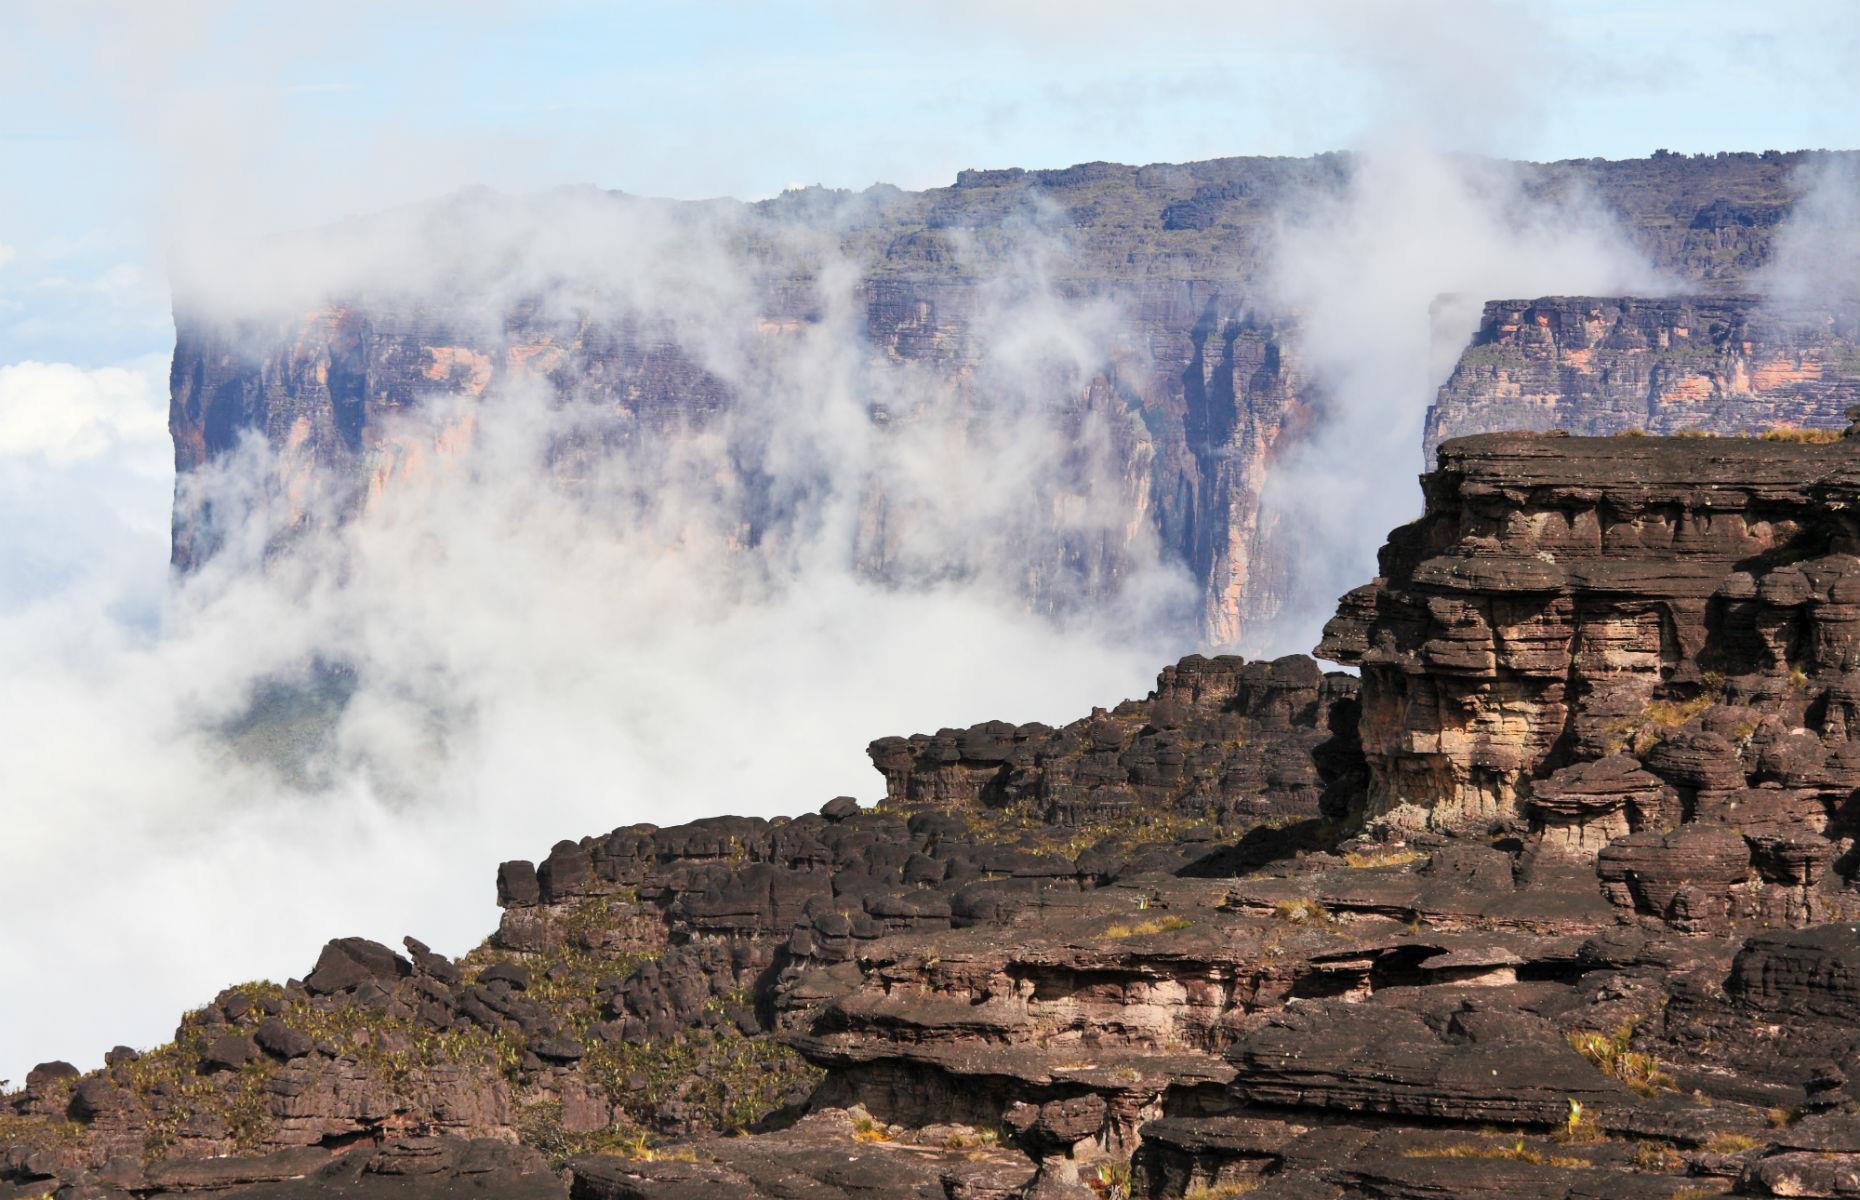 <p>One of the oldest mountain formations on Earth, the otherworldly Mount Roraima sits at the junction of the borders of Venezuela, Brazil, and Guyana. With its 1,300-foot-tall cliffs, often atmospherically shrouded in cloud, and its tabletop formation, it might seem like a floating island, but really it's a spectacular mountain dating back two billion years. Trekking to the top takes about six days, with incredible views and scenery along the way.</p>